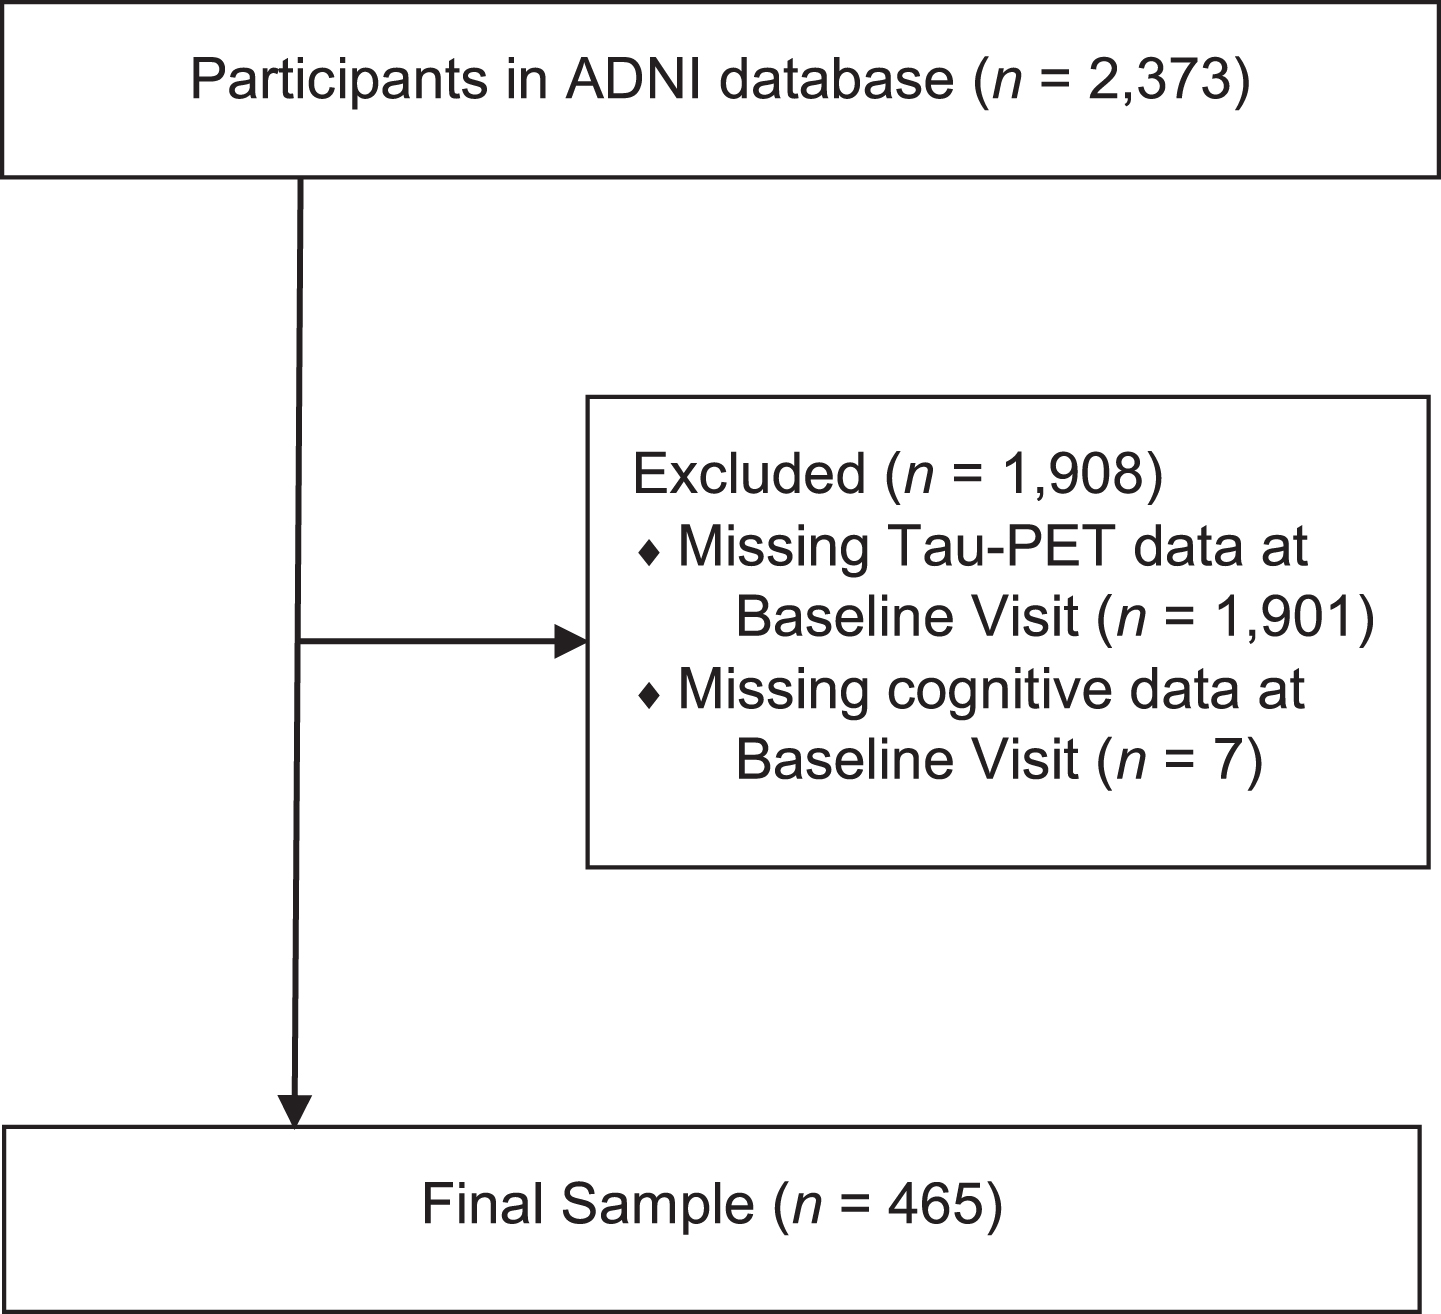 Flow diagram of participants recruited into the current study from the total sample of ADNI participants.